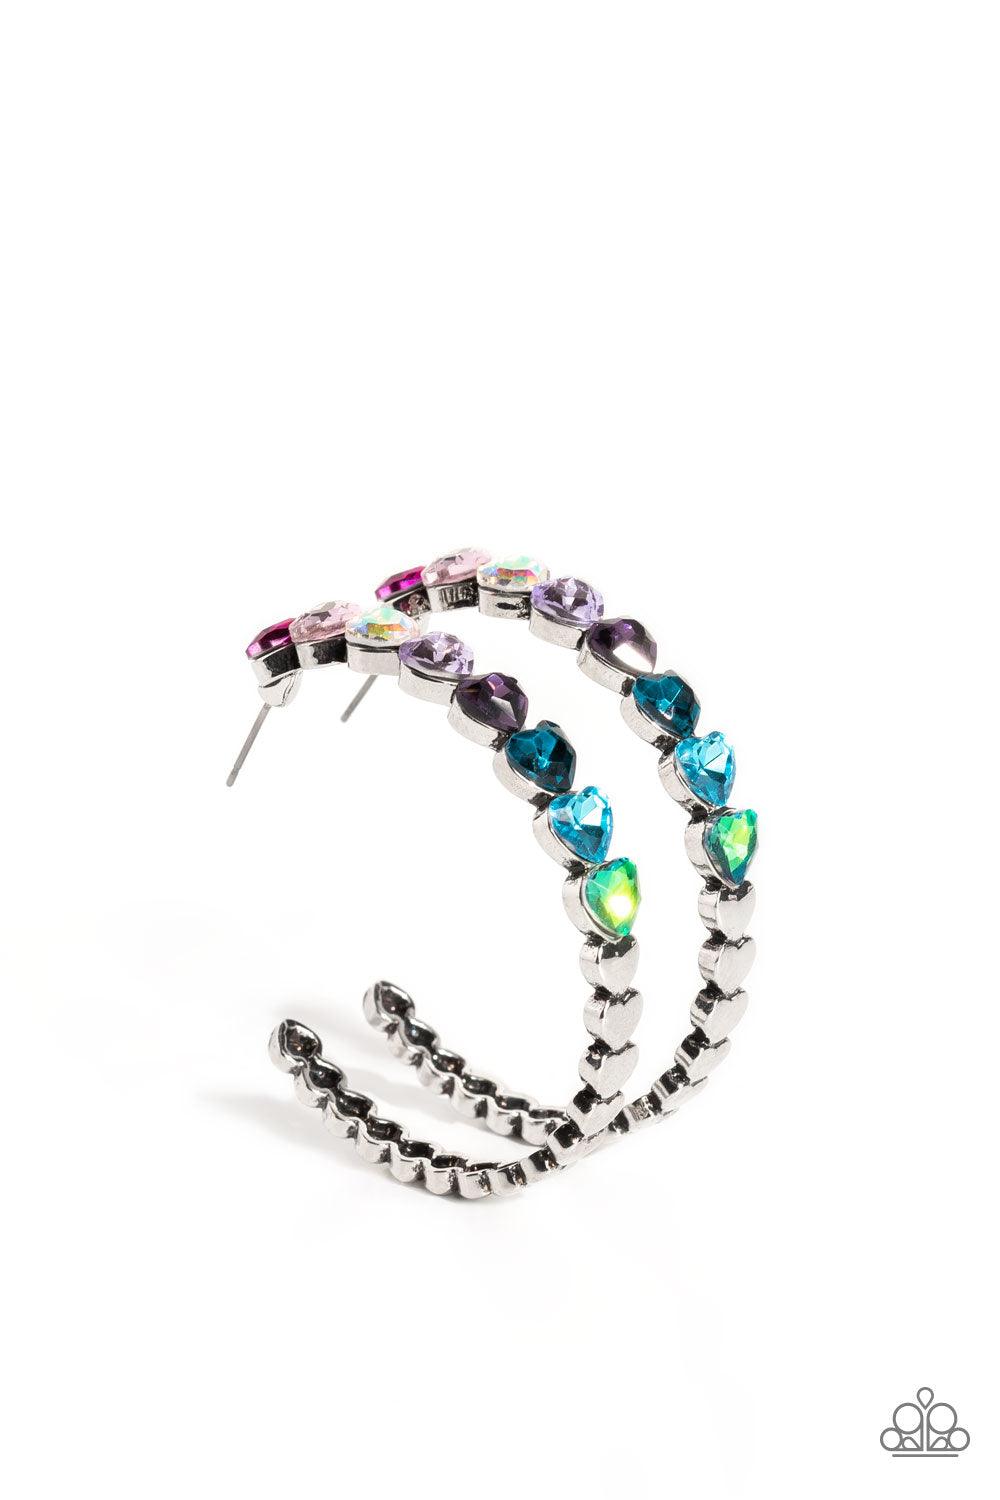 Paparazzi Accessories - Hypnotic Heart Attack - Multicolor Hoop Earrings - Bling by JessieK